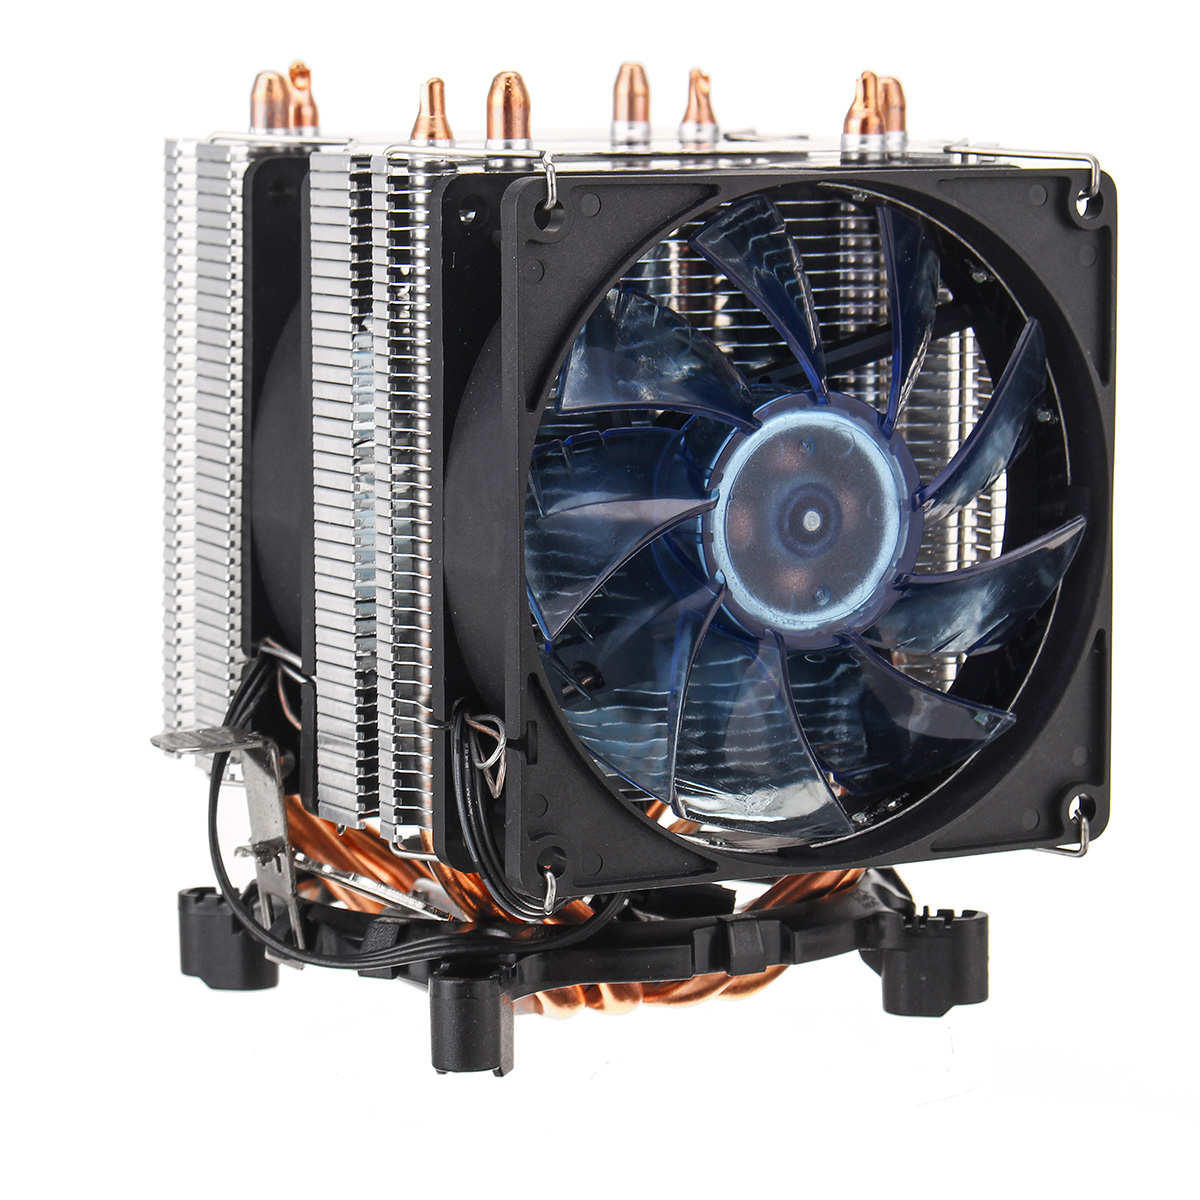 3 Pin Four Copper Pipes Blue Backlit CPU Cooling Fan for AMD for Intel 1155 1156 10